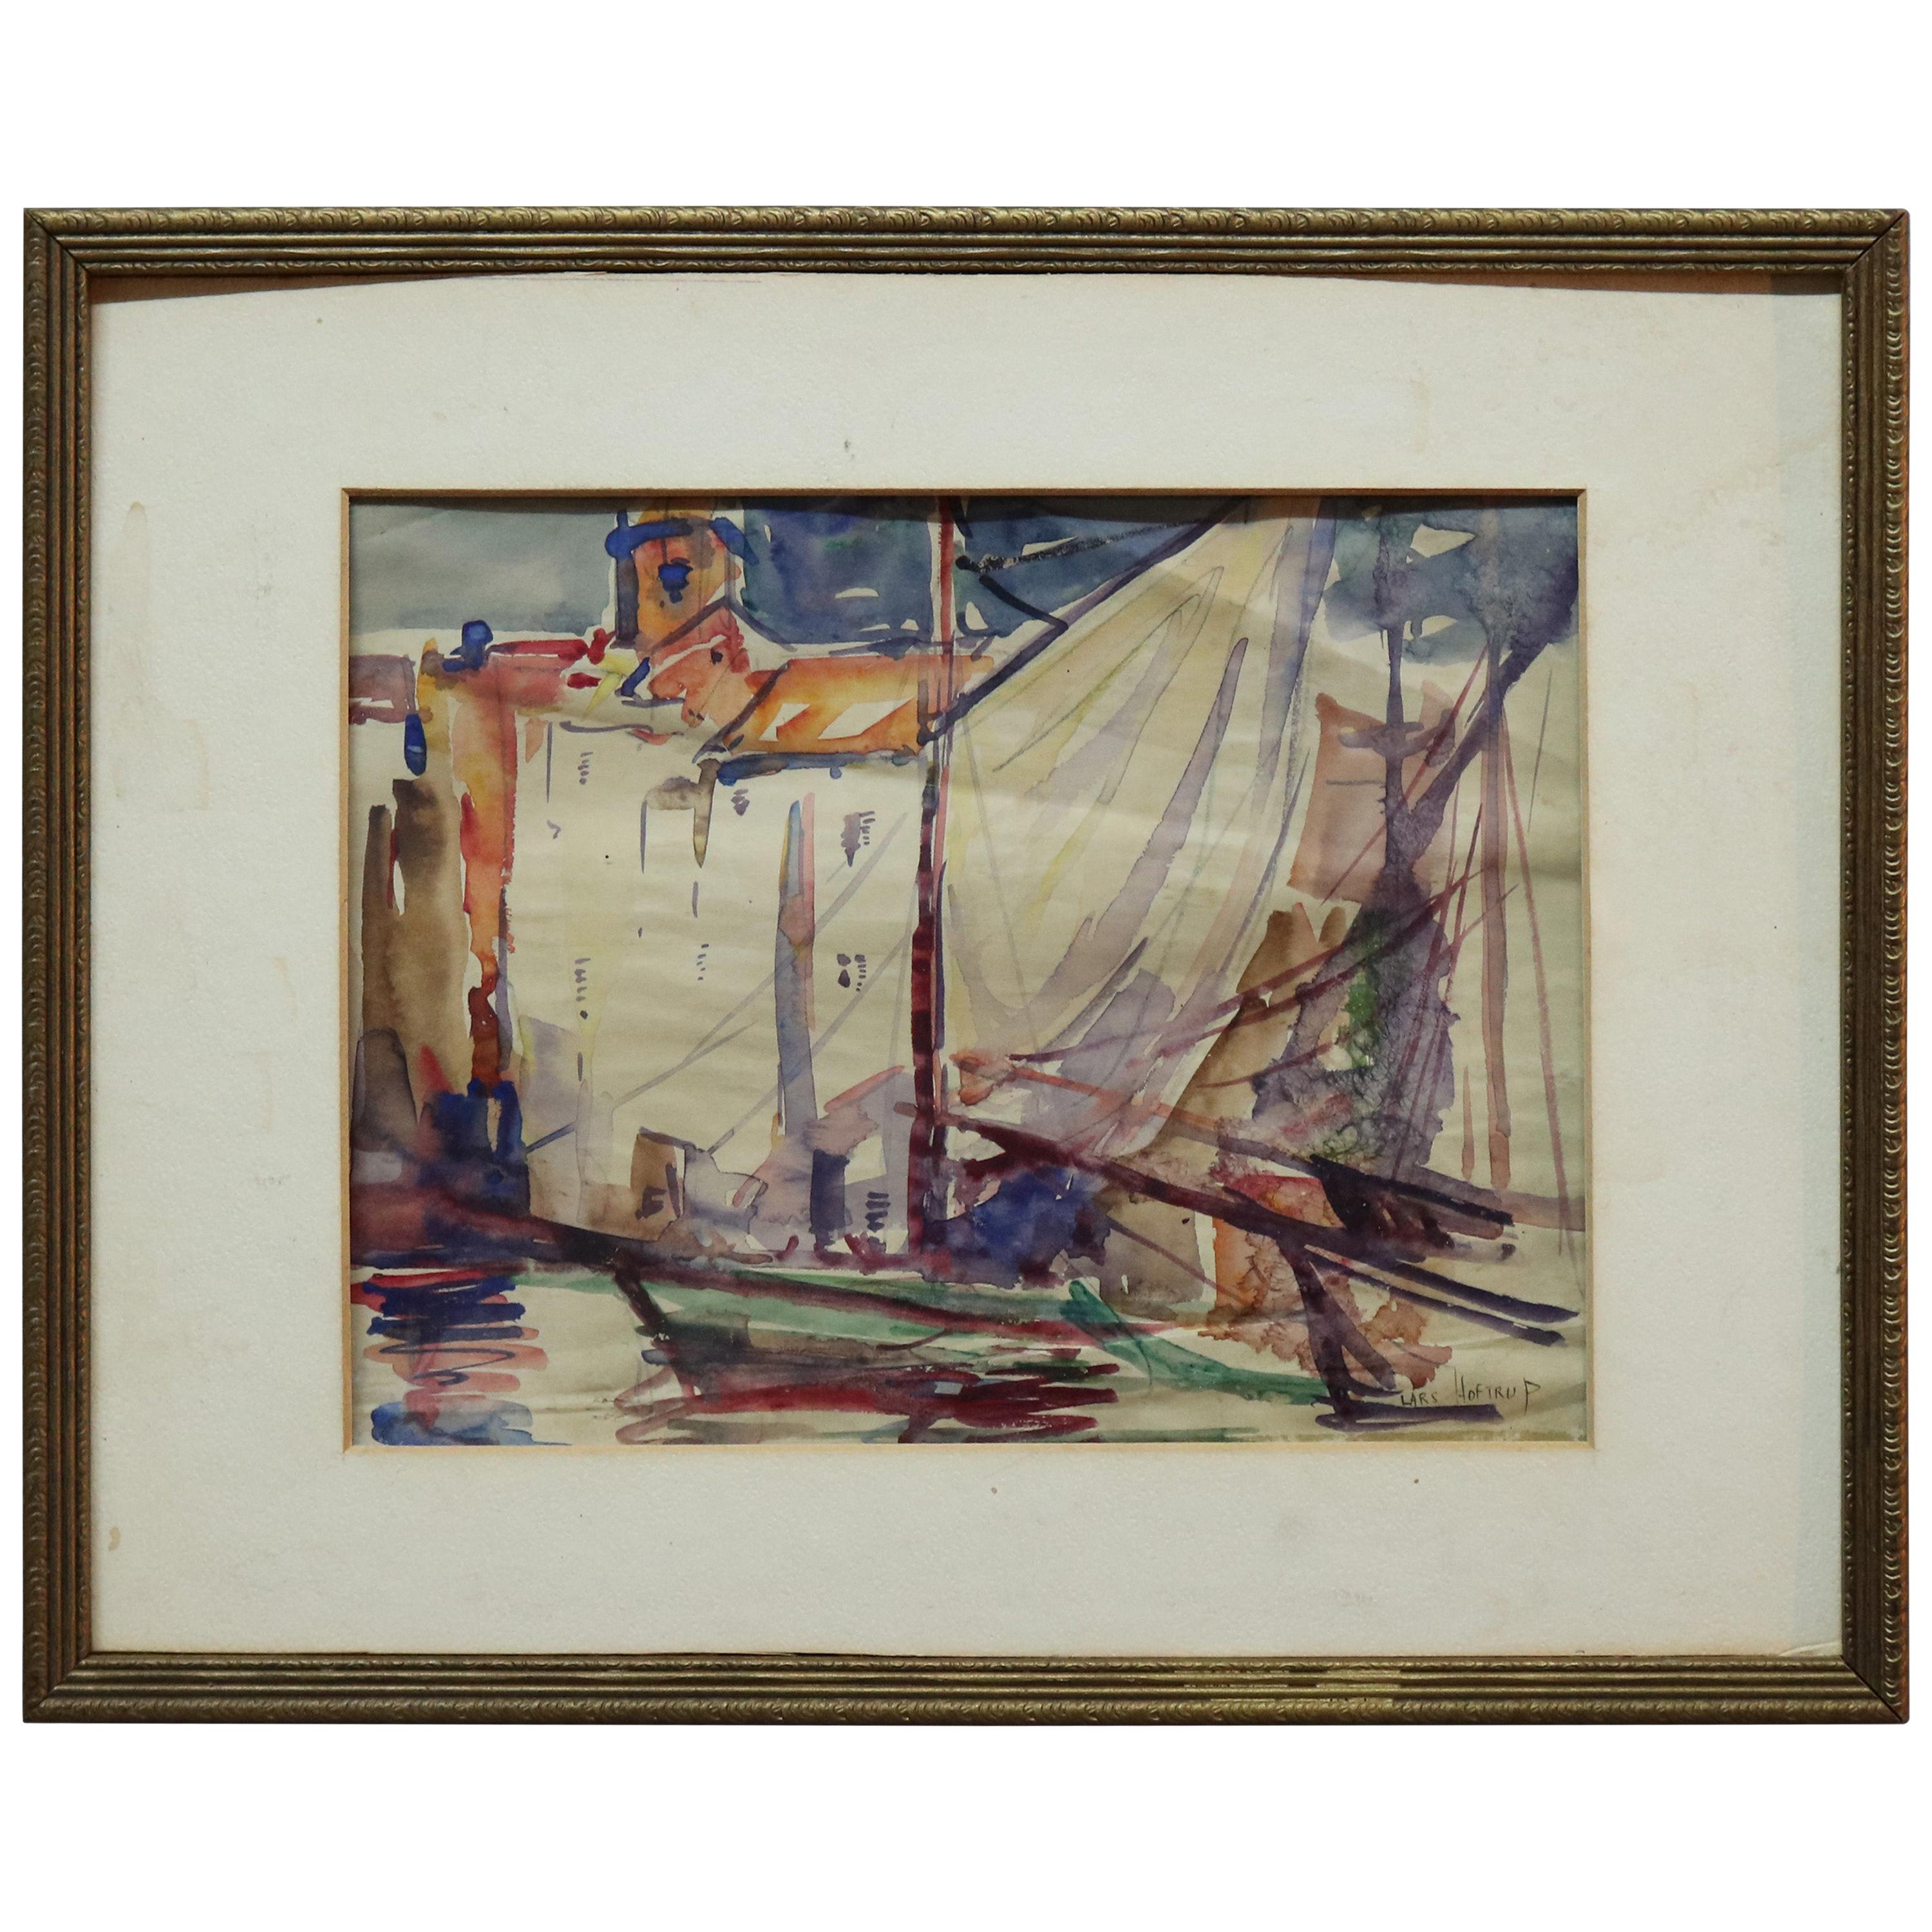 Antique French Watercolor on Paper Harbor Scene by Lars Hoftrup, circa 1920